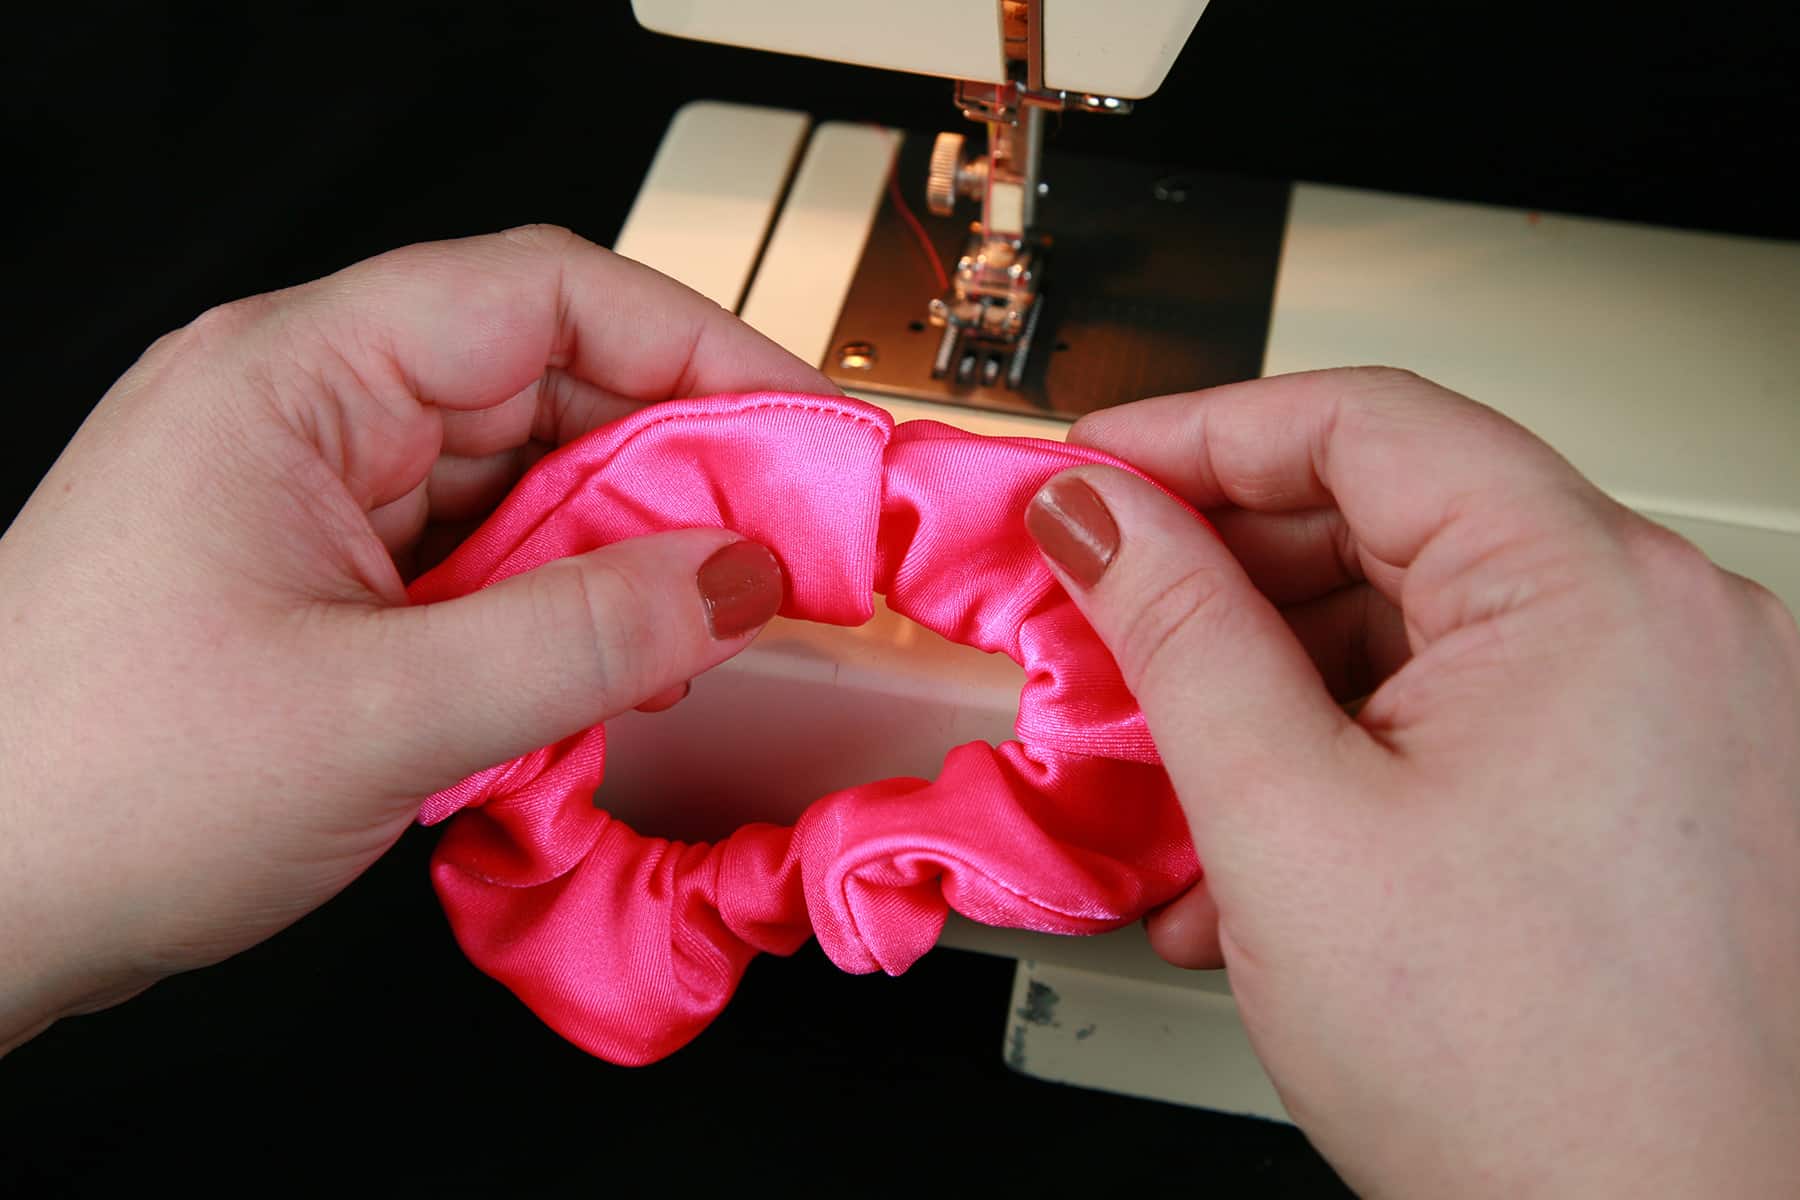 Two hands are shown manipulating a scrunchie in front of a sewing machine.